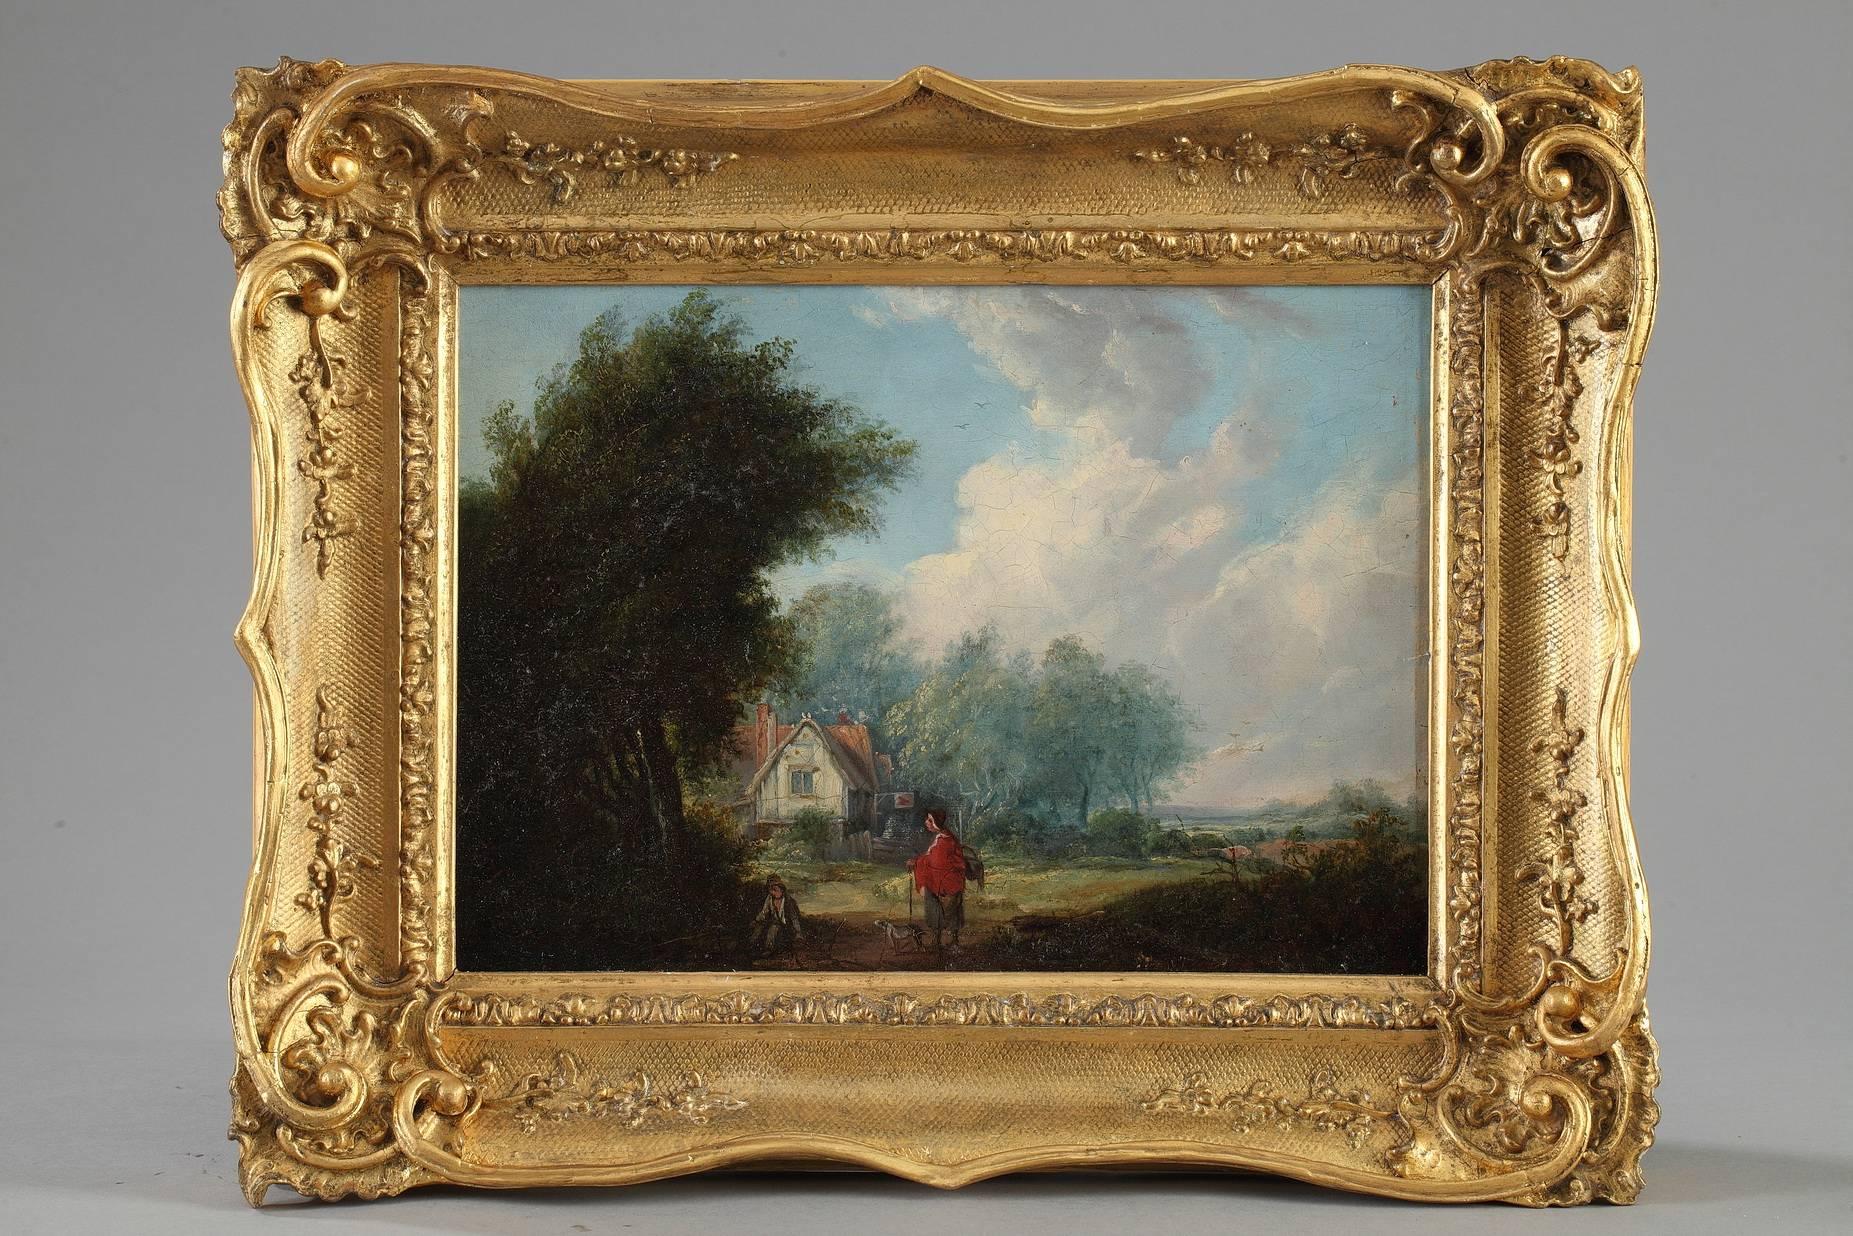 Two oil on panel paintings from the Empire period. They portray landscapes with a village in the background and several figures: a fisherman talking with a village woman on one, and a family warming themselves by a wood fire on the other. The